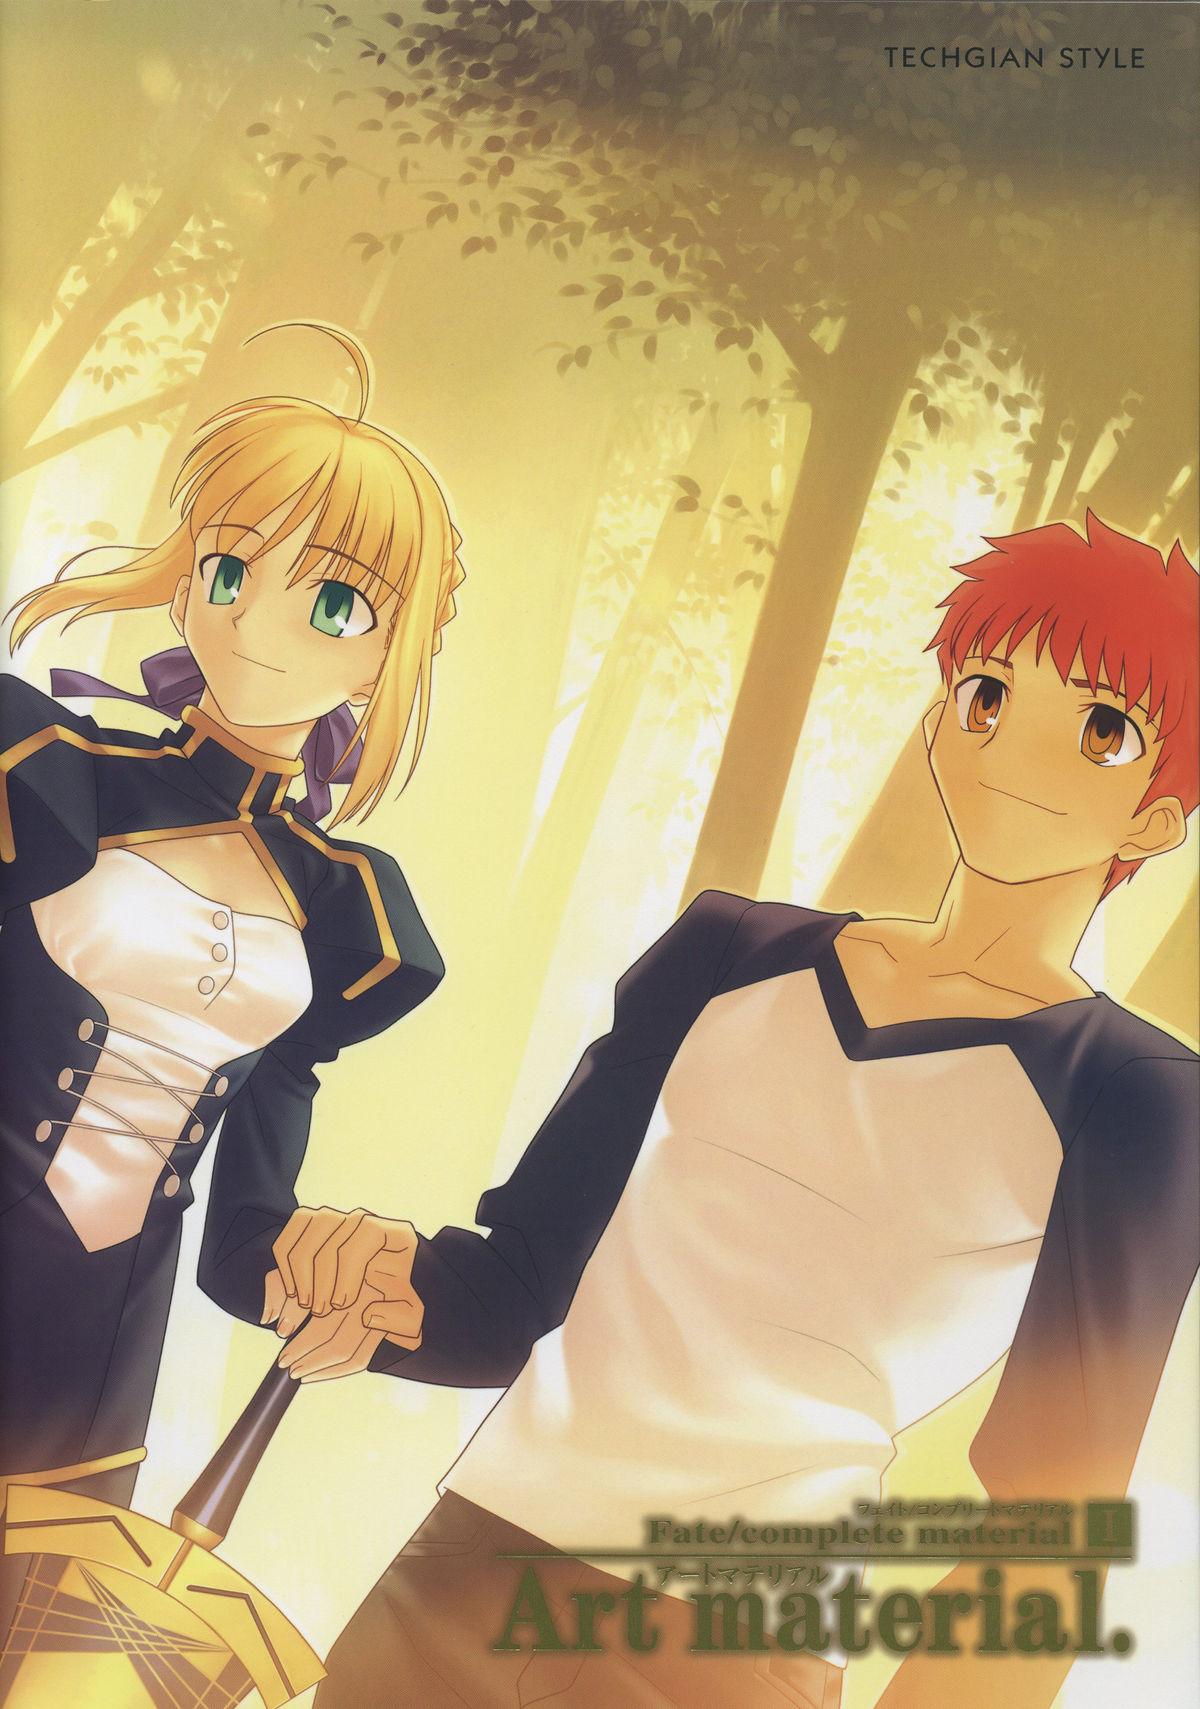 Fate/complete material I - Art material. 0